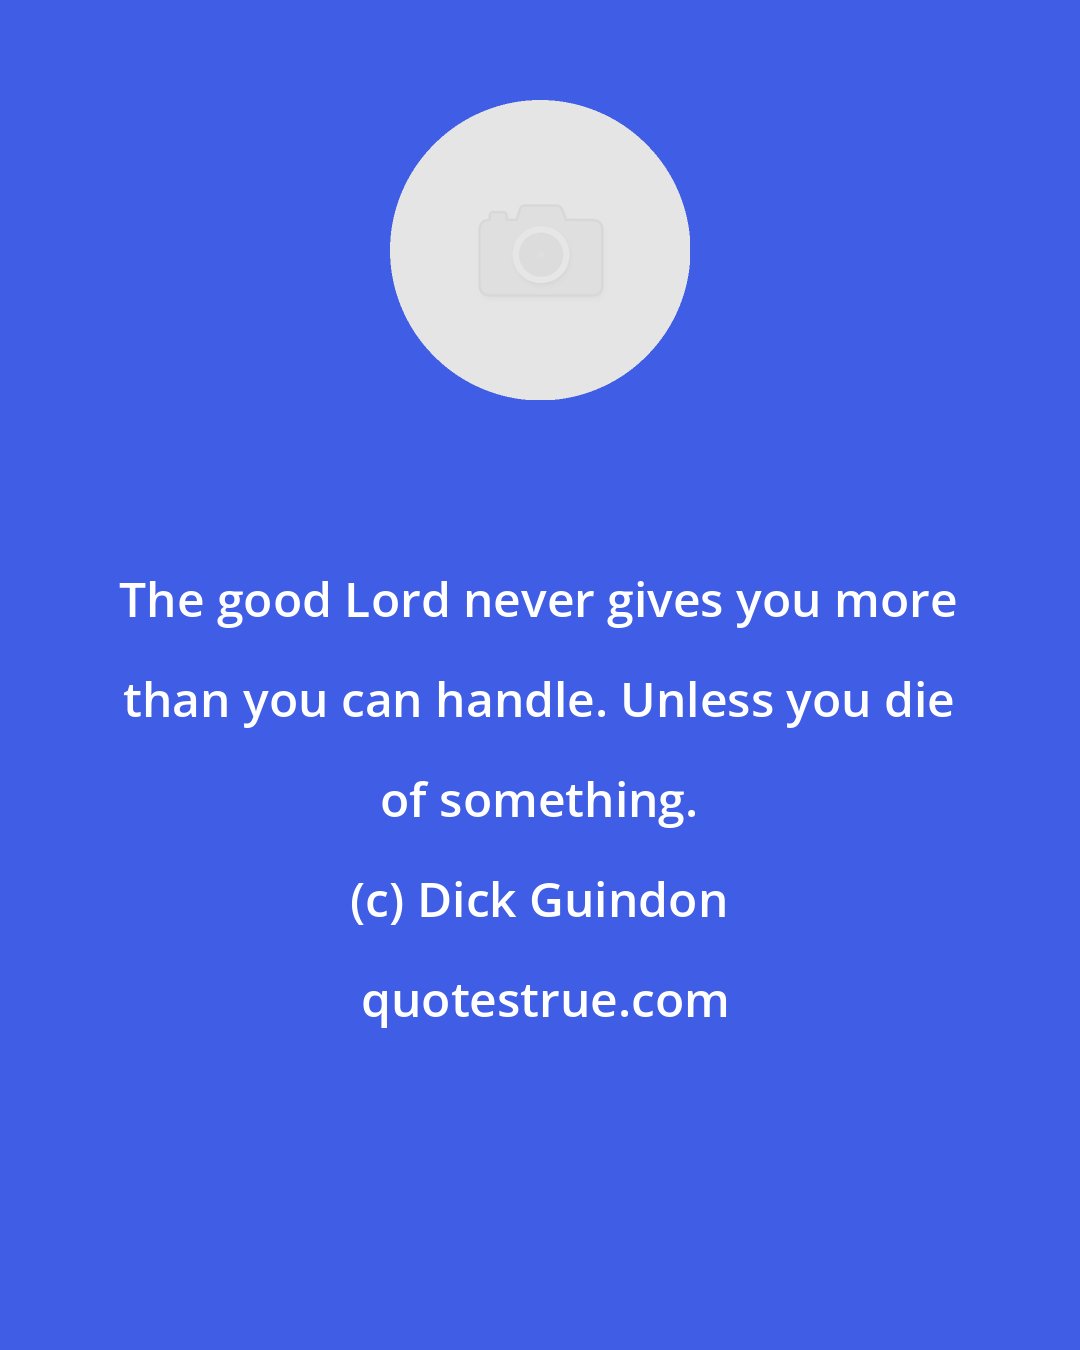 Dick Guindon: The good Lord never gives you more than you can handle. Unless you die of something.